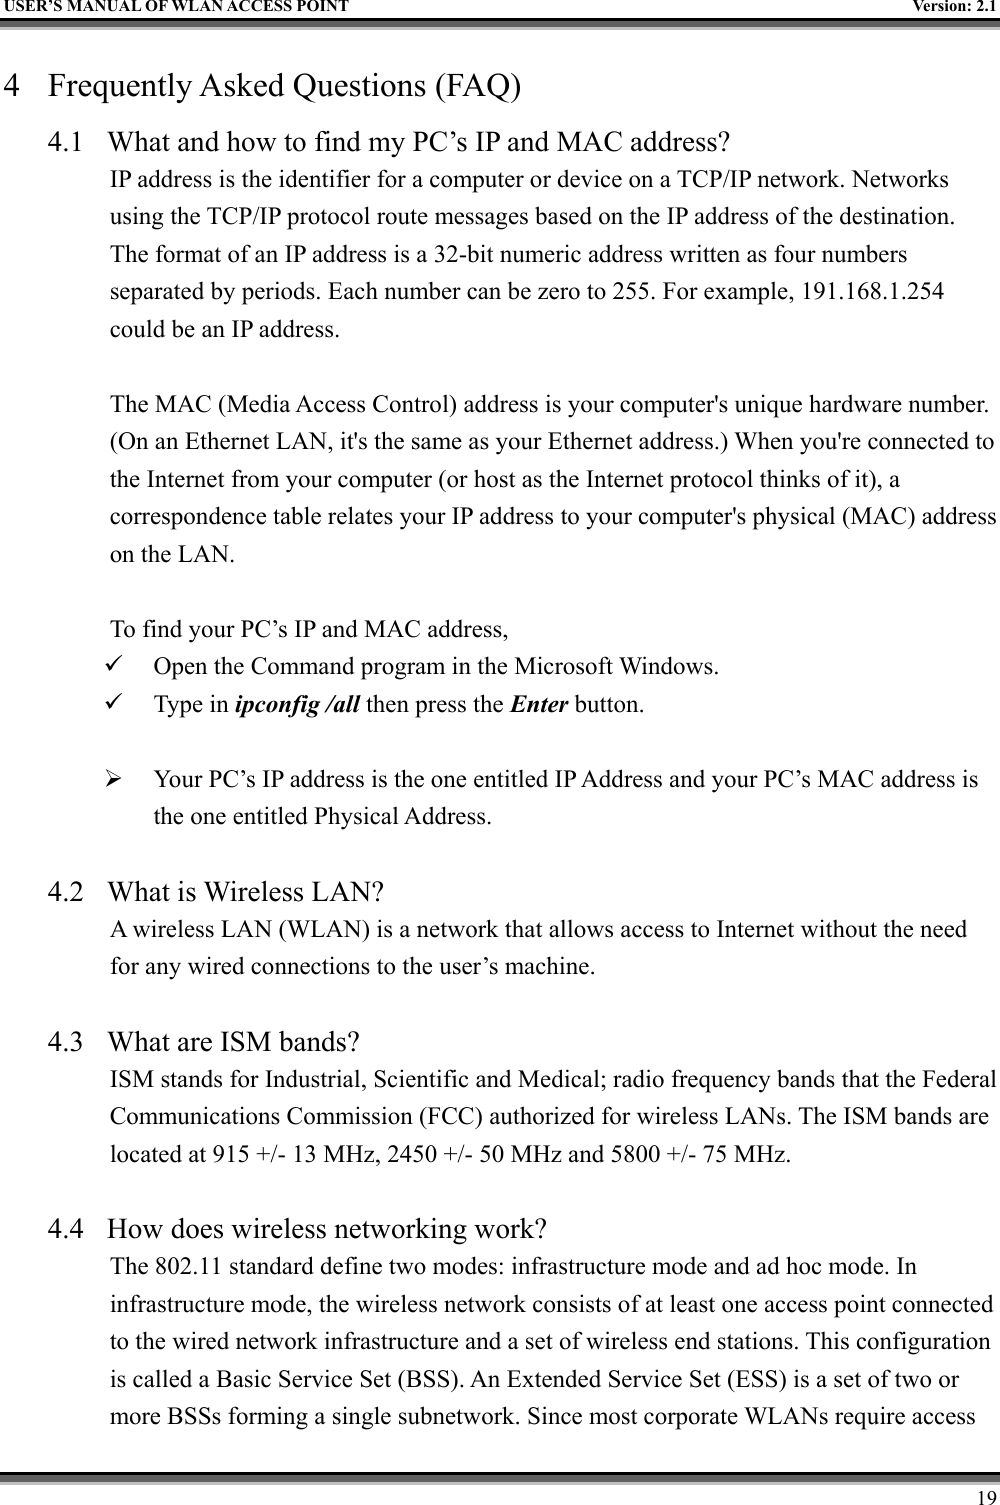   USER’S MANUAL OF WLAN ACCESS POINT    Version: 2.1     19 4  Frequently Asked Questions (FAQ) 4.1  What and how to find my PC’s IP and MAC address? IP address is the identifier for a computer or device on a TCP/IP network. Networks using the TCP/IP protocol route messages based on the IP address of the destination. The format of an IP address is a 32-bit numeric address written as four numbers separated by periods. Each number can be zero to 255. For example, 191.168.1.254 could be an IP address.  The MAC (Media Access Control) address is your computer&apos;s unique hardware number. (On an Ethernet LAN, it&apos;s the same as your Ethernet address.) When you&apos;re connected to the Internet from your computer (or host as the Internet protocol thinks of it), a correspondence table relates your IP address to your computer&apos;s physical (MAC) address on the LAN.  To find your PC’s IP and MAC address,   Open the Command program in the Microsoft Windows.   Type in ipconfig /all then press the Enter button.    Your PC’s IP address is the one entitled IP Address and your PC’s MAC address is the one entitled Physical Address.  4.2  What is Wireless LAN?   A wireless LAN (WLAN) is a network that allows access to Internet without the need for any wired connections to the user’s machine.    4.3  What are ISM bands?   ISM stands for Industrial, Scientific and Medical; radio frequency bands that the Federal Communications Commission (FCC) authorized for wireless LANs. The ISM bands are located at 915 +/- 13 MHz, 2450 +/- 50 MHz and 5800 +/- 75 MHz.    4.4  How does wireless networking work?   The 802.11 standard define two modes: infrastructure mode and ad hoc mode. In infrastructure mode, the wireless network consists of at least one access point connected to the wired network infrastructure and a set of wireless end stations. This configuration is called a Basic Service Set (BSS). An Extended Service Set (ESS) is a set of two or more BSSs forming a single subnetwork. Since most corporate WLANs require access 